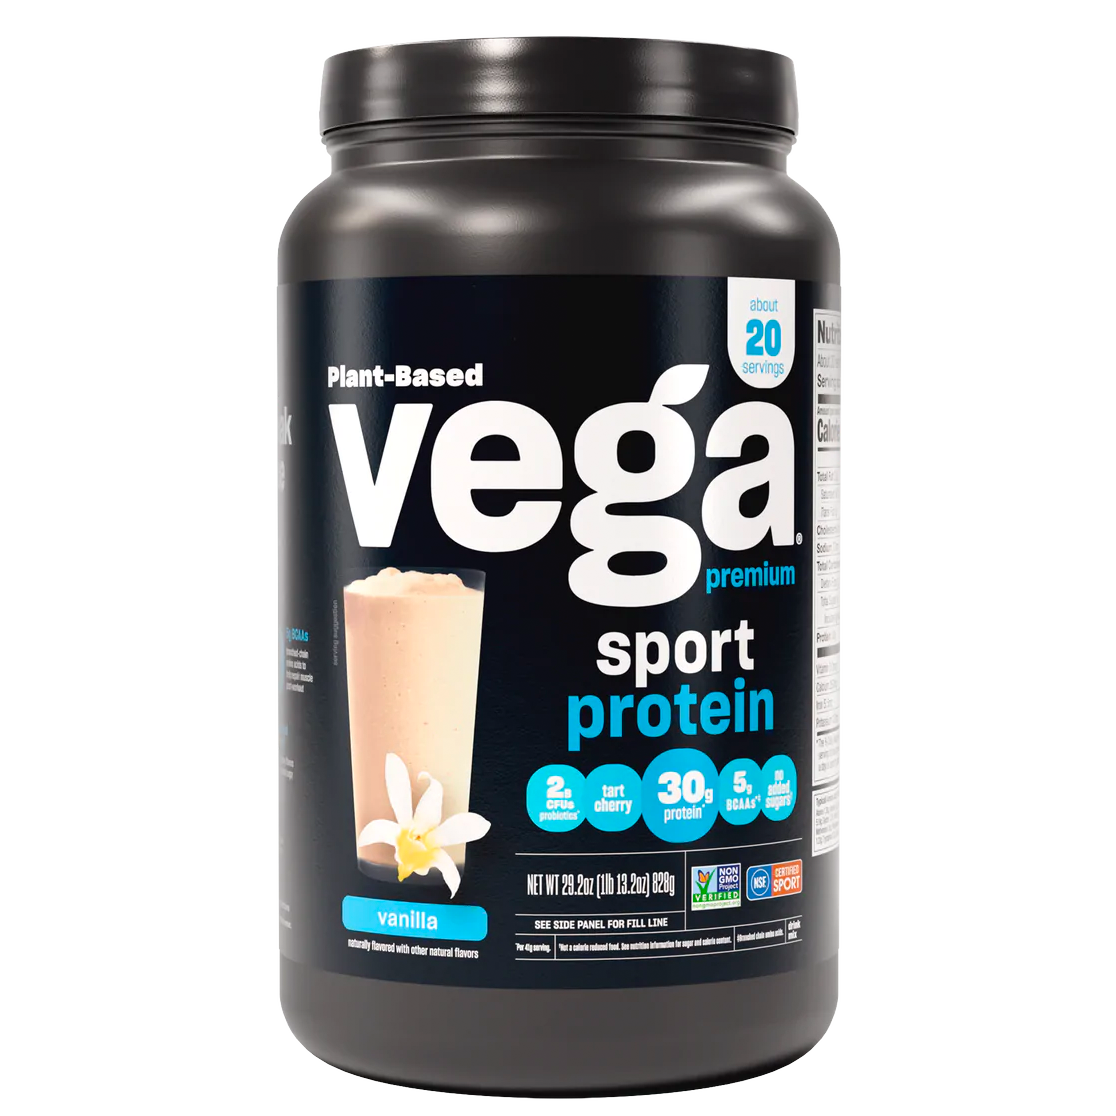 Performance Protein (20 Servings) alternate view